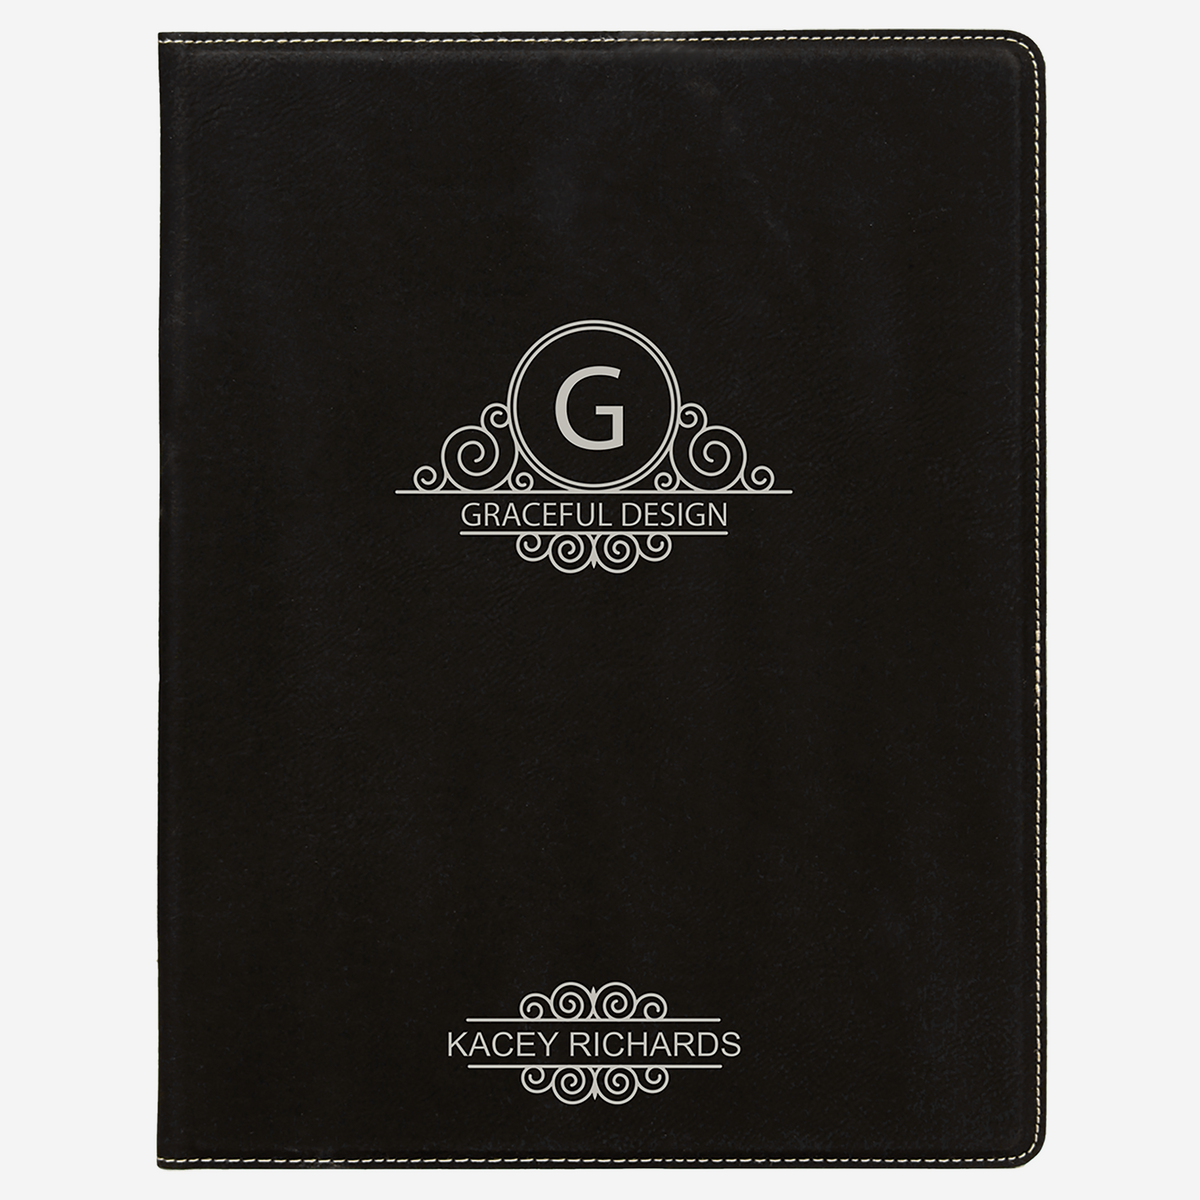 7" x 9" Laserable Black Leatherette Small Portfolio with Notepad front view with Graceful Design Logo engraving in silver